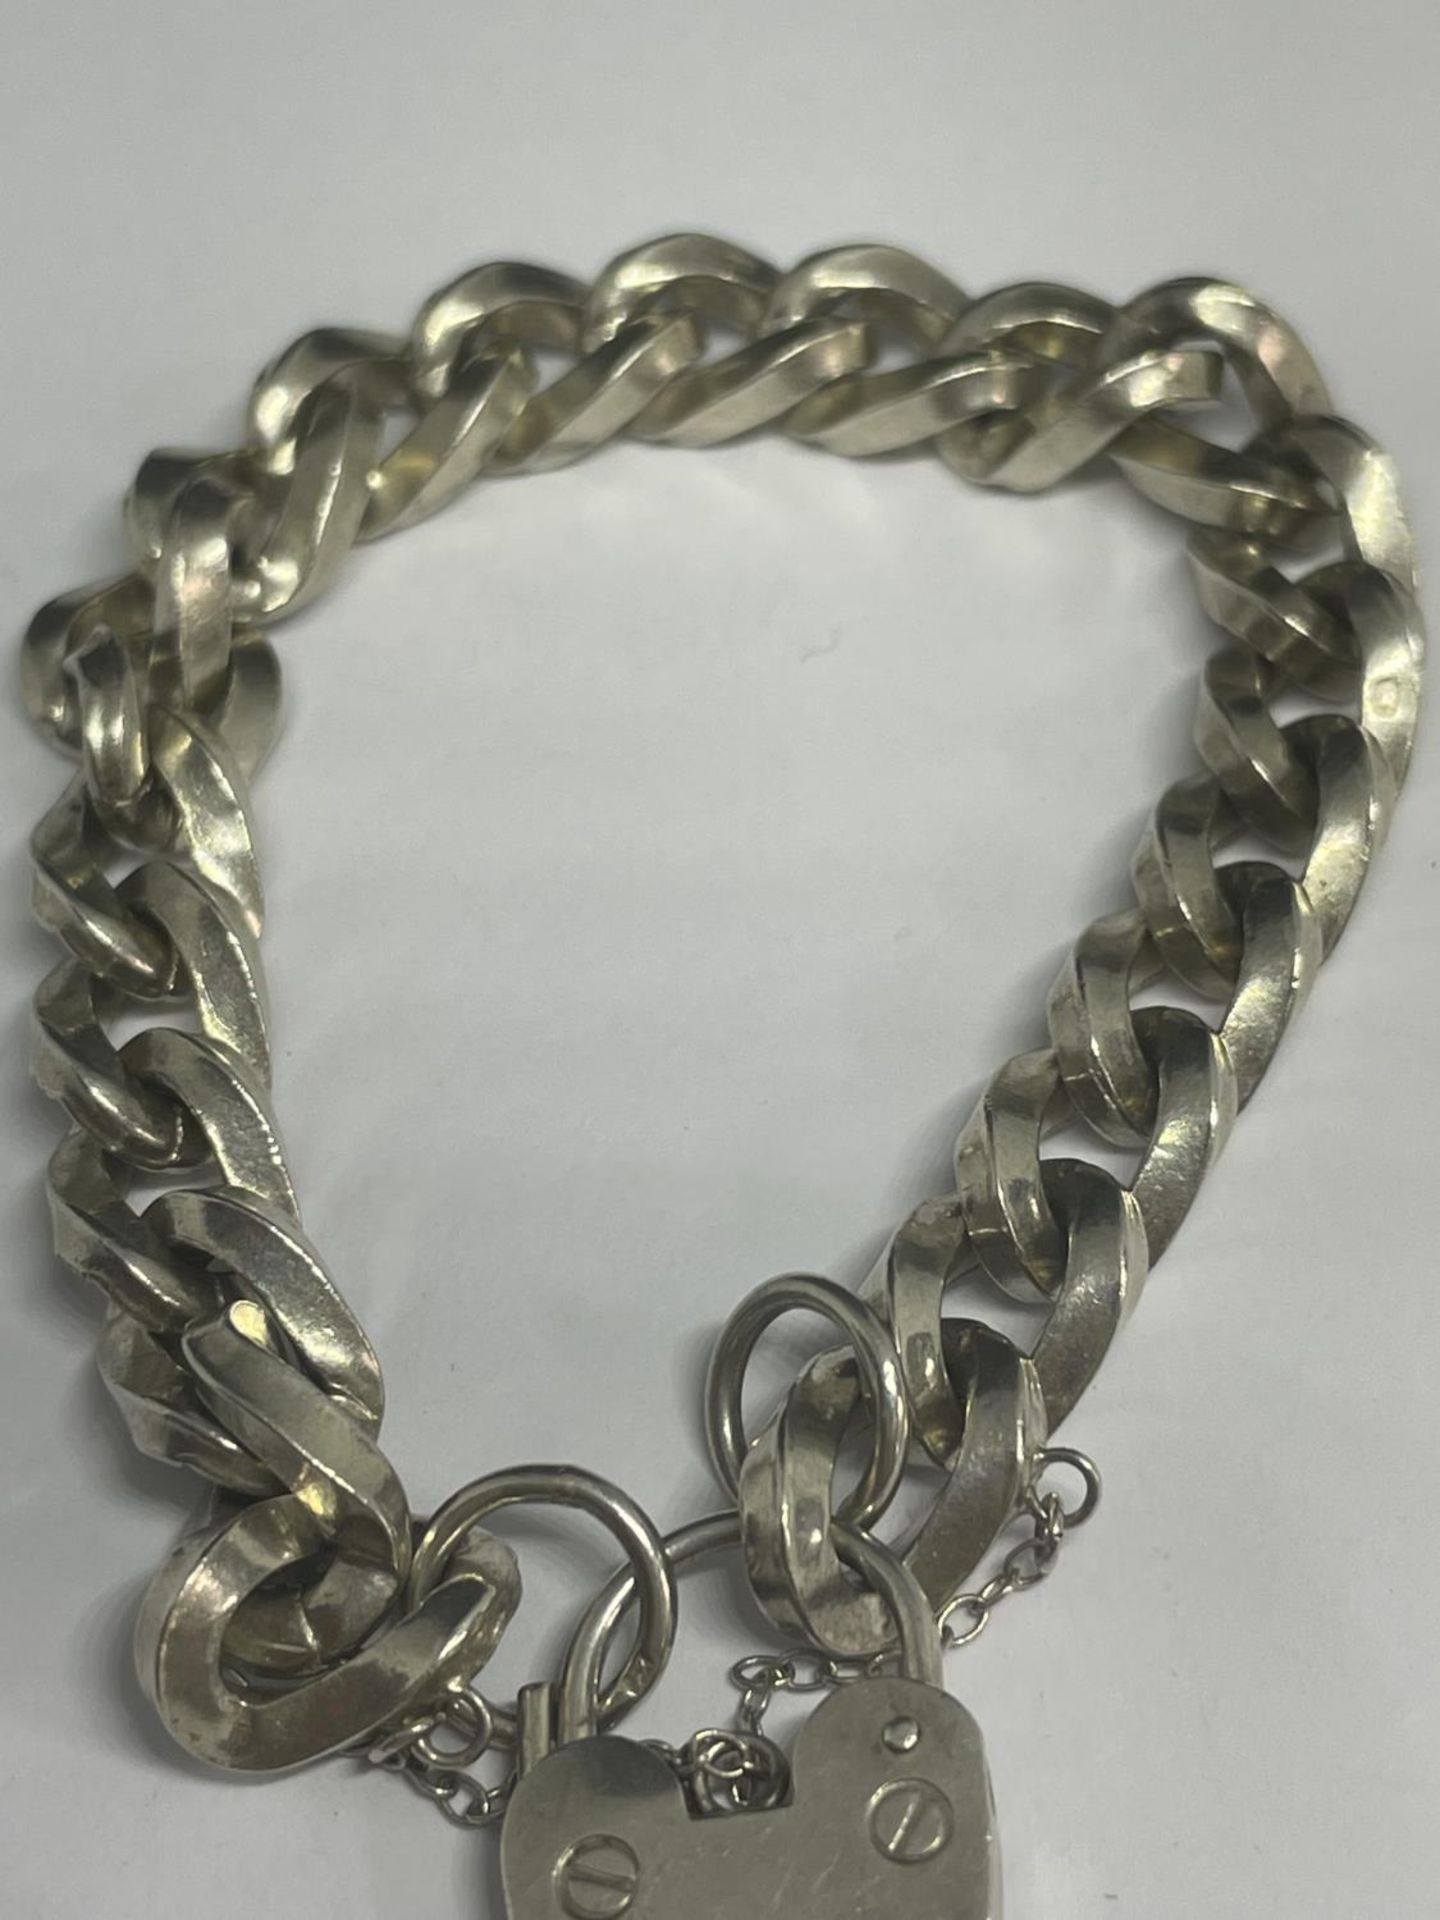 A HEAVY MARKED SILVER BRACELET WITH A HEART LOCK - Image 3 of 4